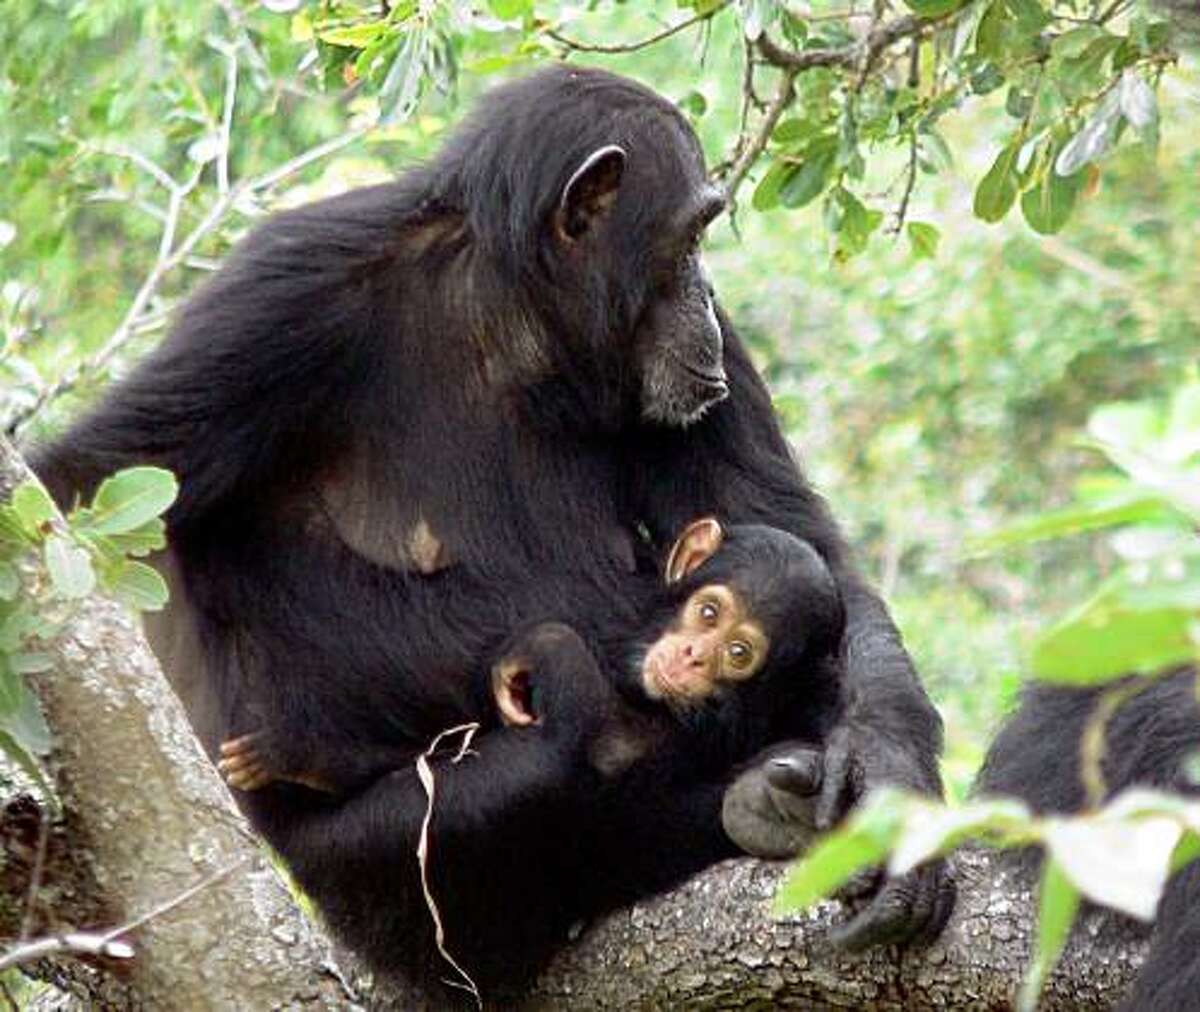 In this March 7, 2006, handout photo provided by Nature magazine, Chimp 099 is shown with her daughter in Gombe National Park, Tanzania. Ch-099, first sampled in 2003, was infected with SIVcpz from the onset of the study. She died in November 2006 from complications of a spinal cord injury. Her body, recovered shortly after her death, was one of three bodies of SIVcpz infected chimpanzees that were subject to post-mortem analysis. (AP Photo/Michael L. Wilson, Nature)